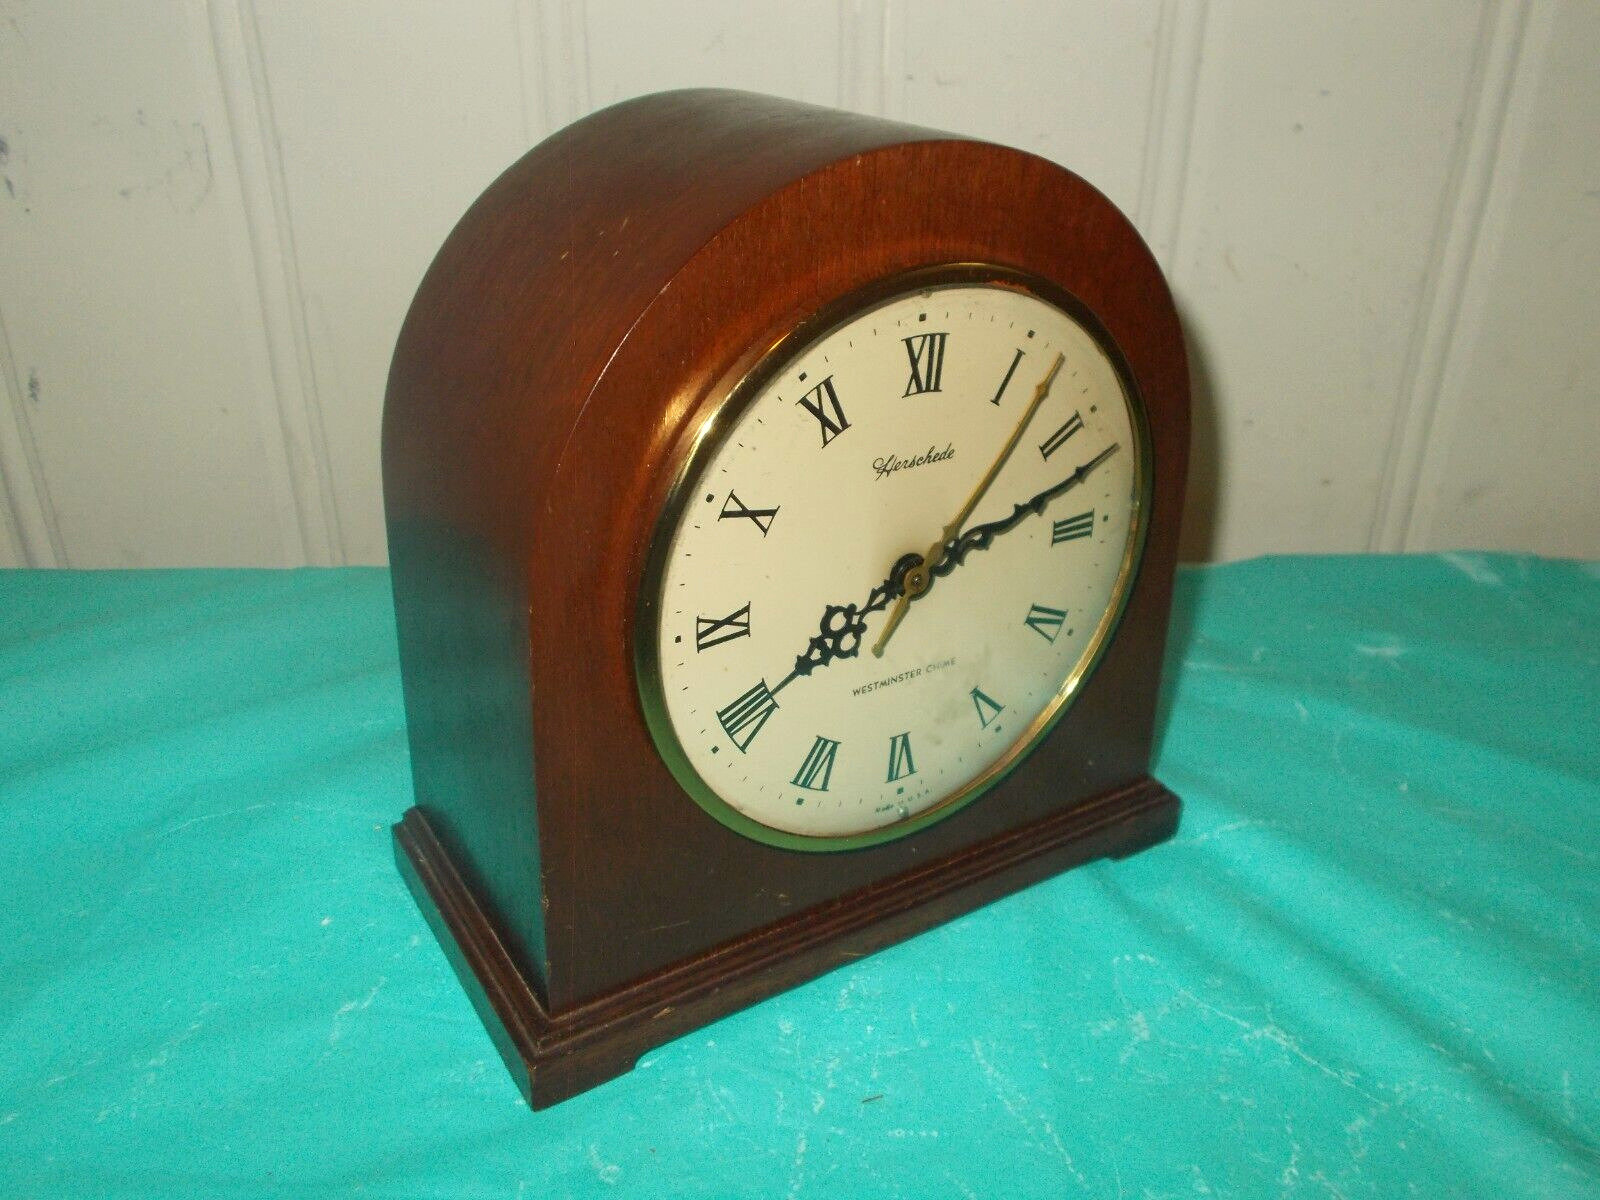 VINTAGE HERSCHEDE ELECTRIC MANTLE CLOCK H-854 ACCURATE TIME